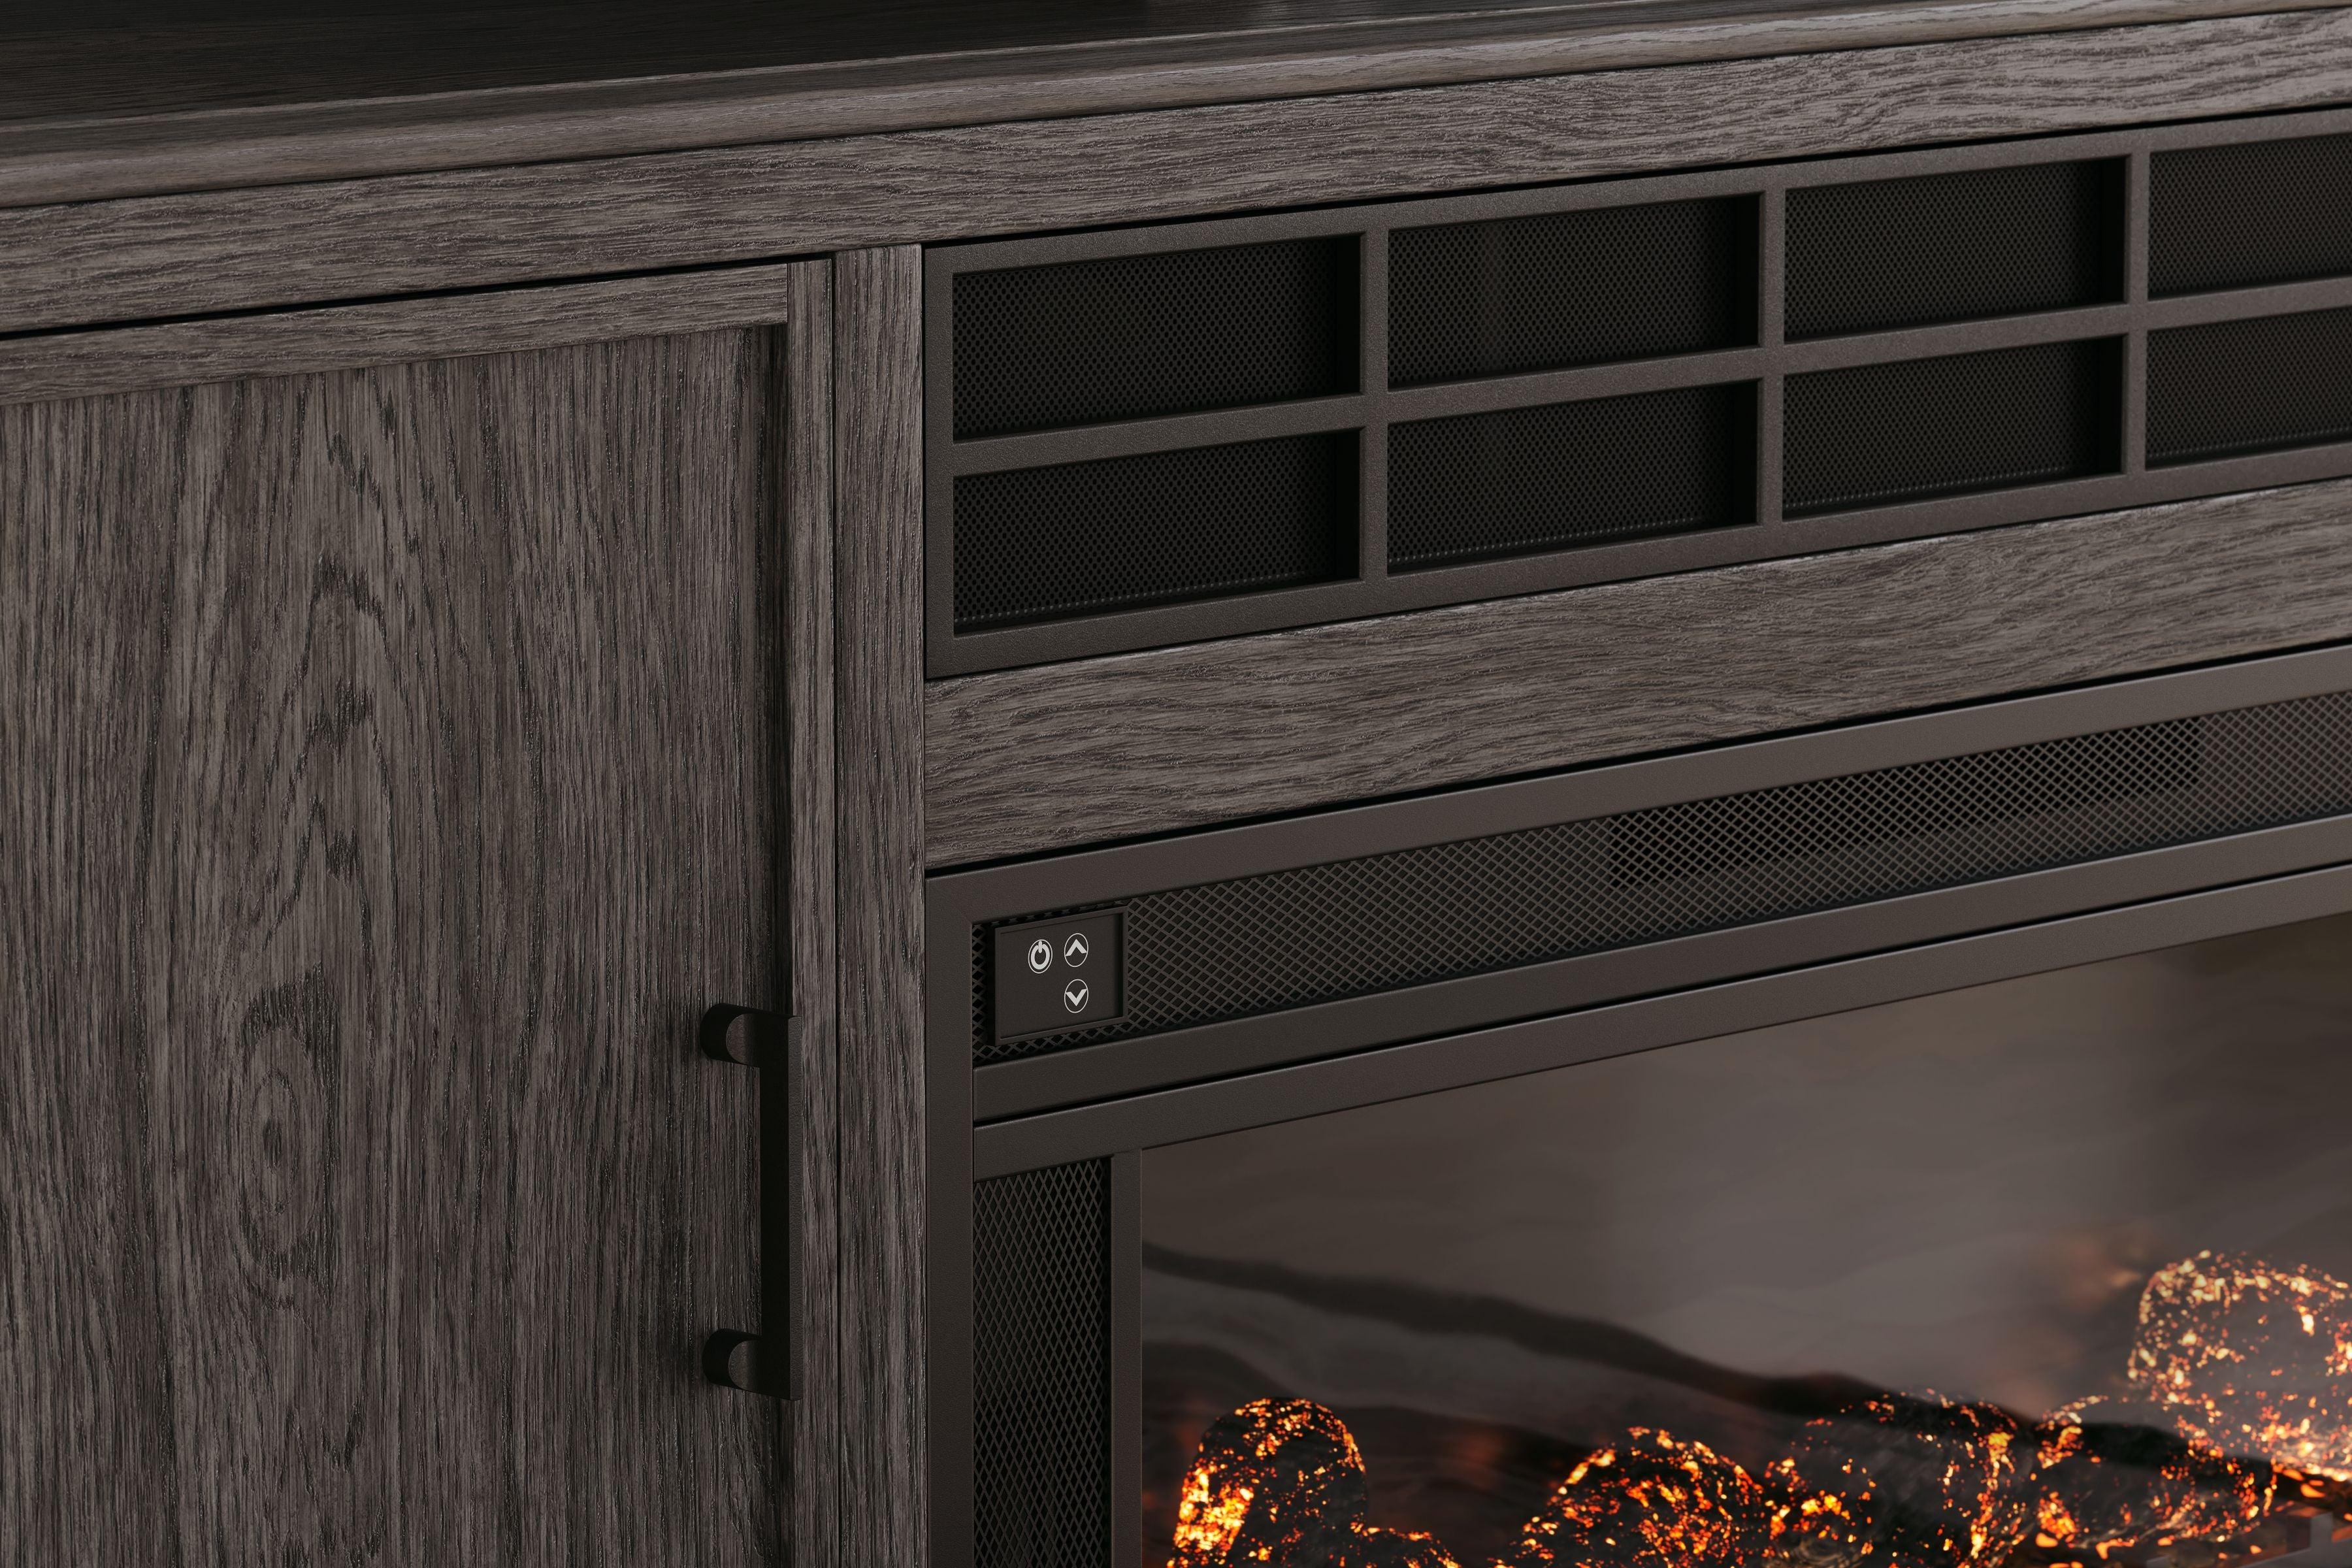 Signature Design by Ashley® - Montillan - Grayish Brown - 84" TV Stand With Electric Fireplace - 5th Avenue Furniture